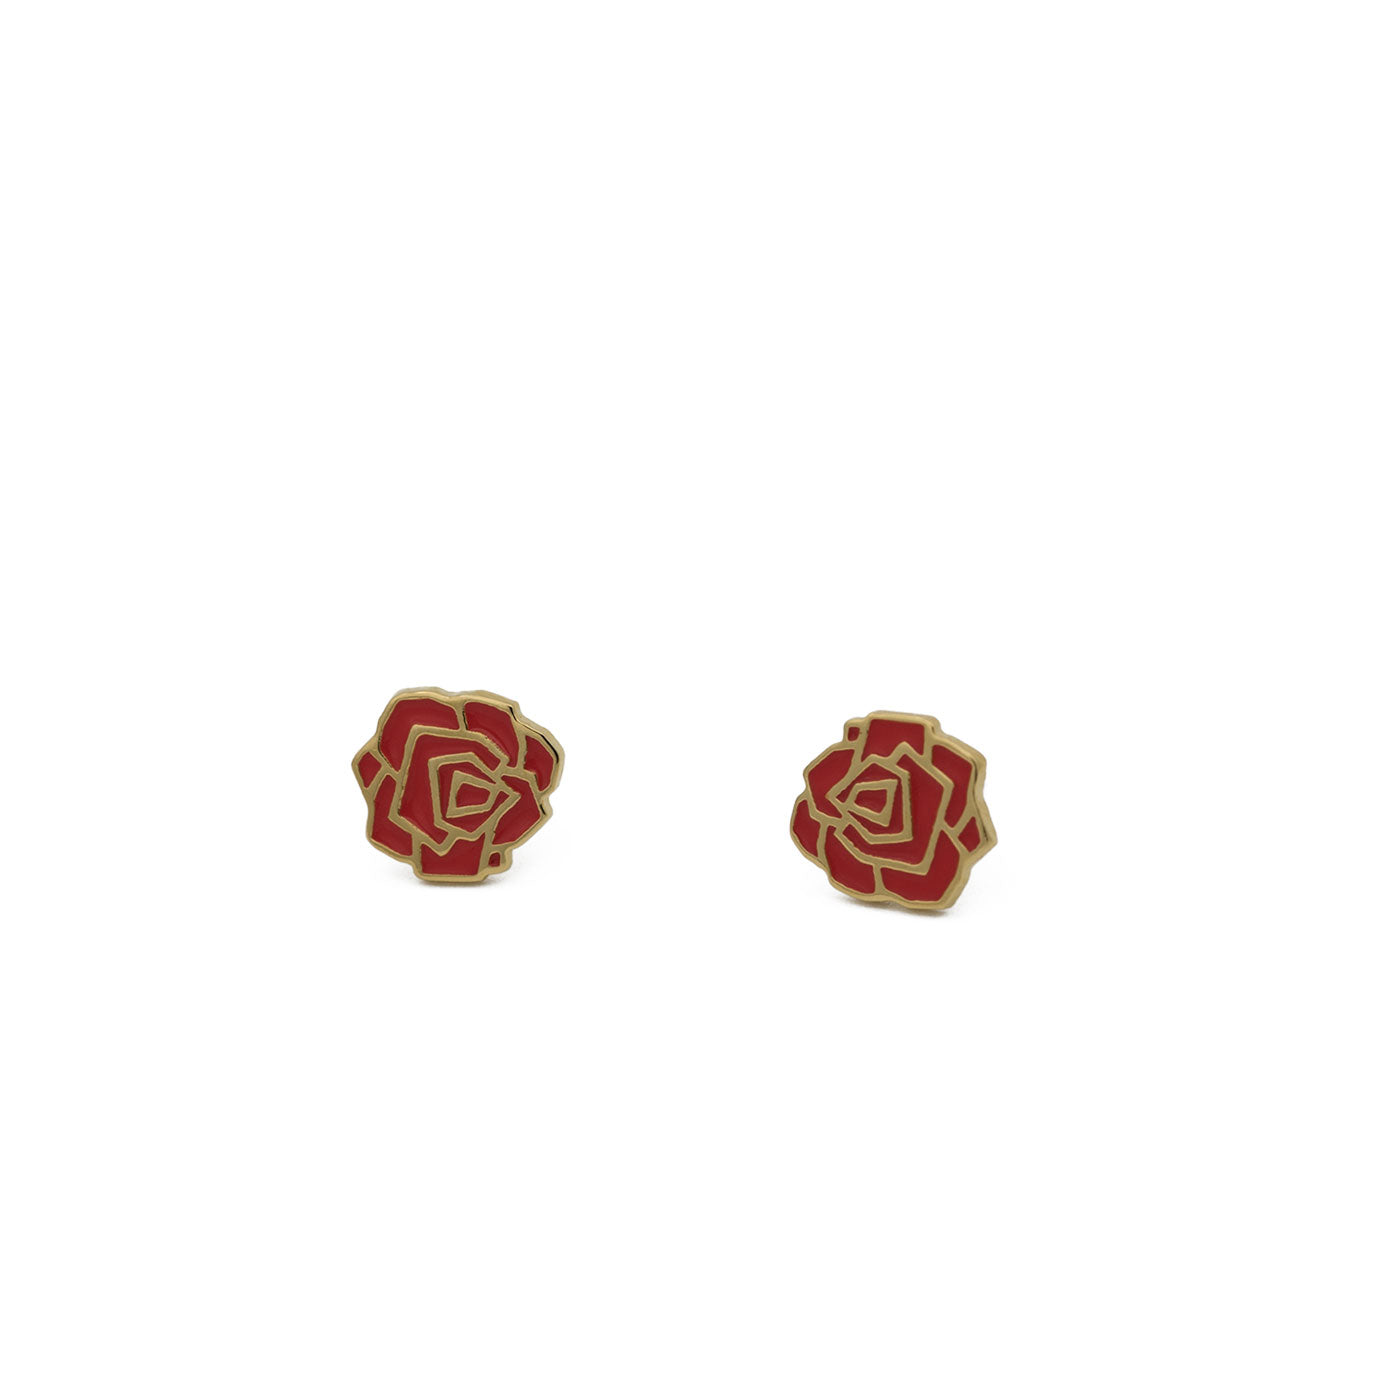 rose earring studs in gold vermeil with red enamel